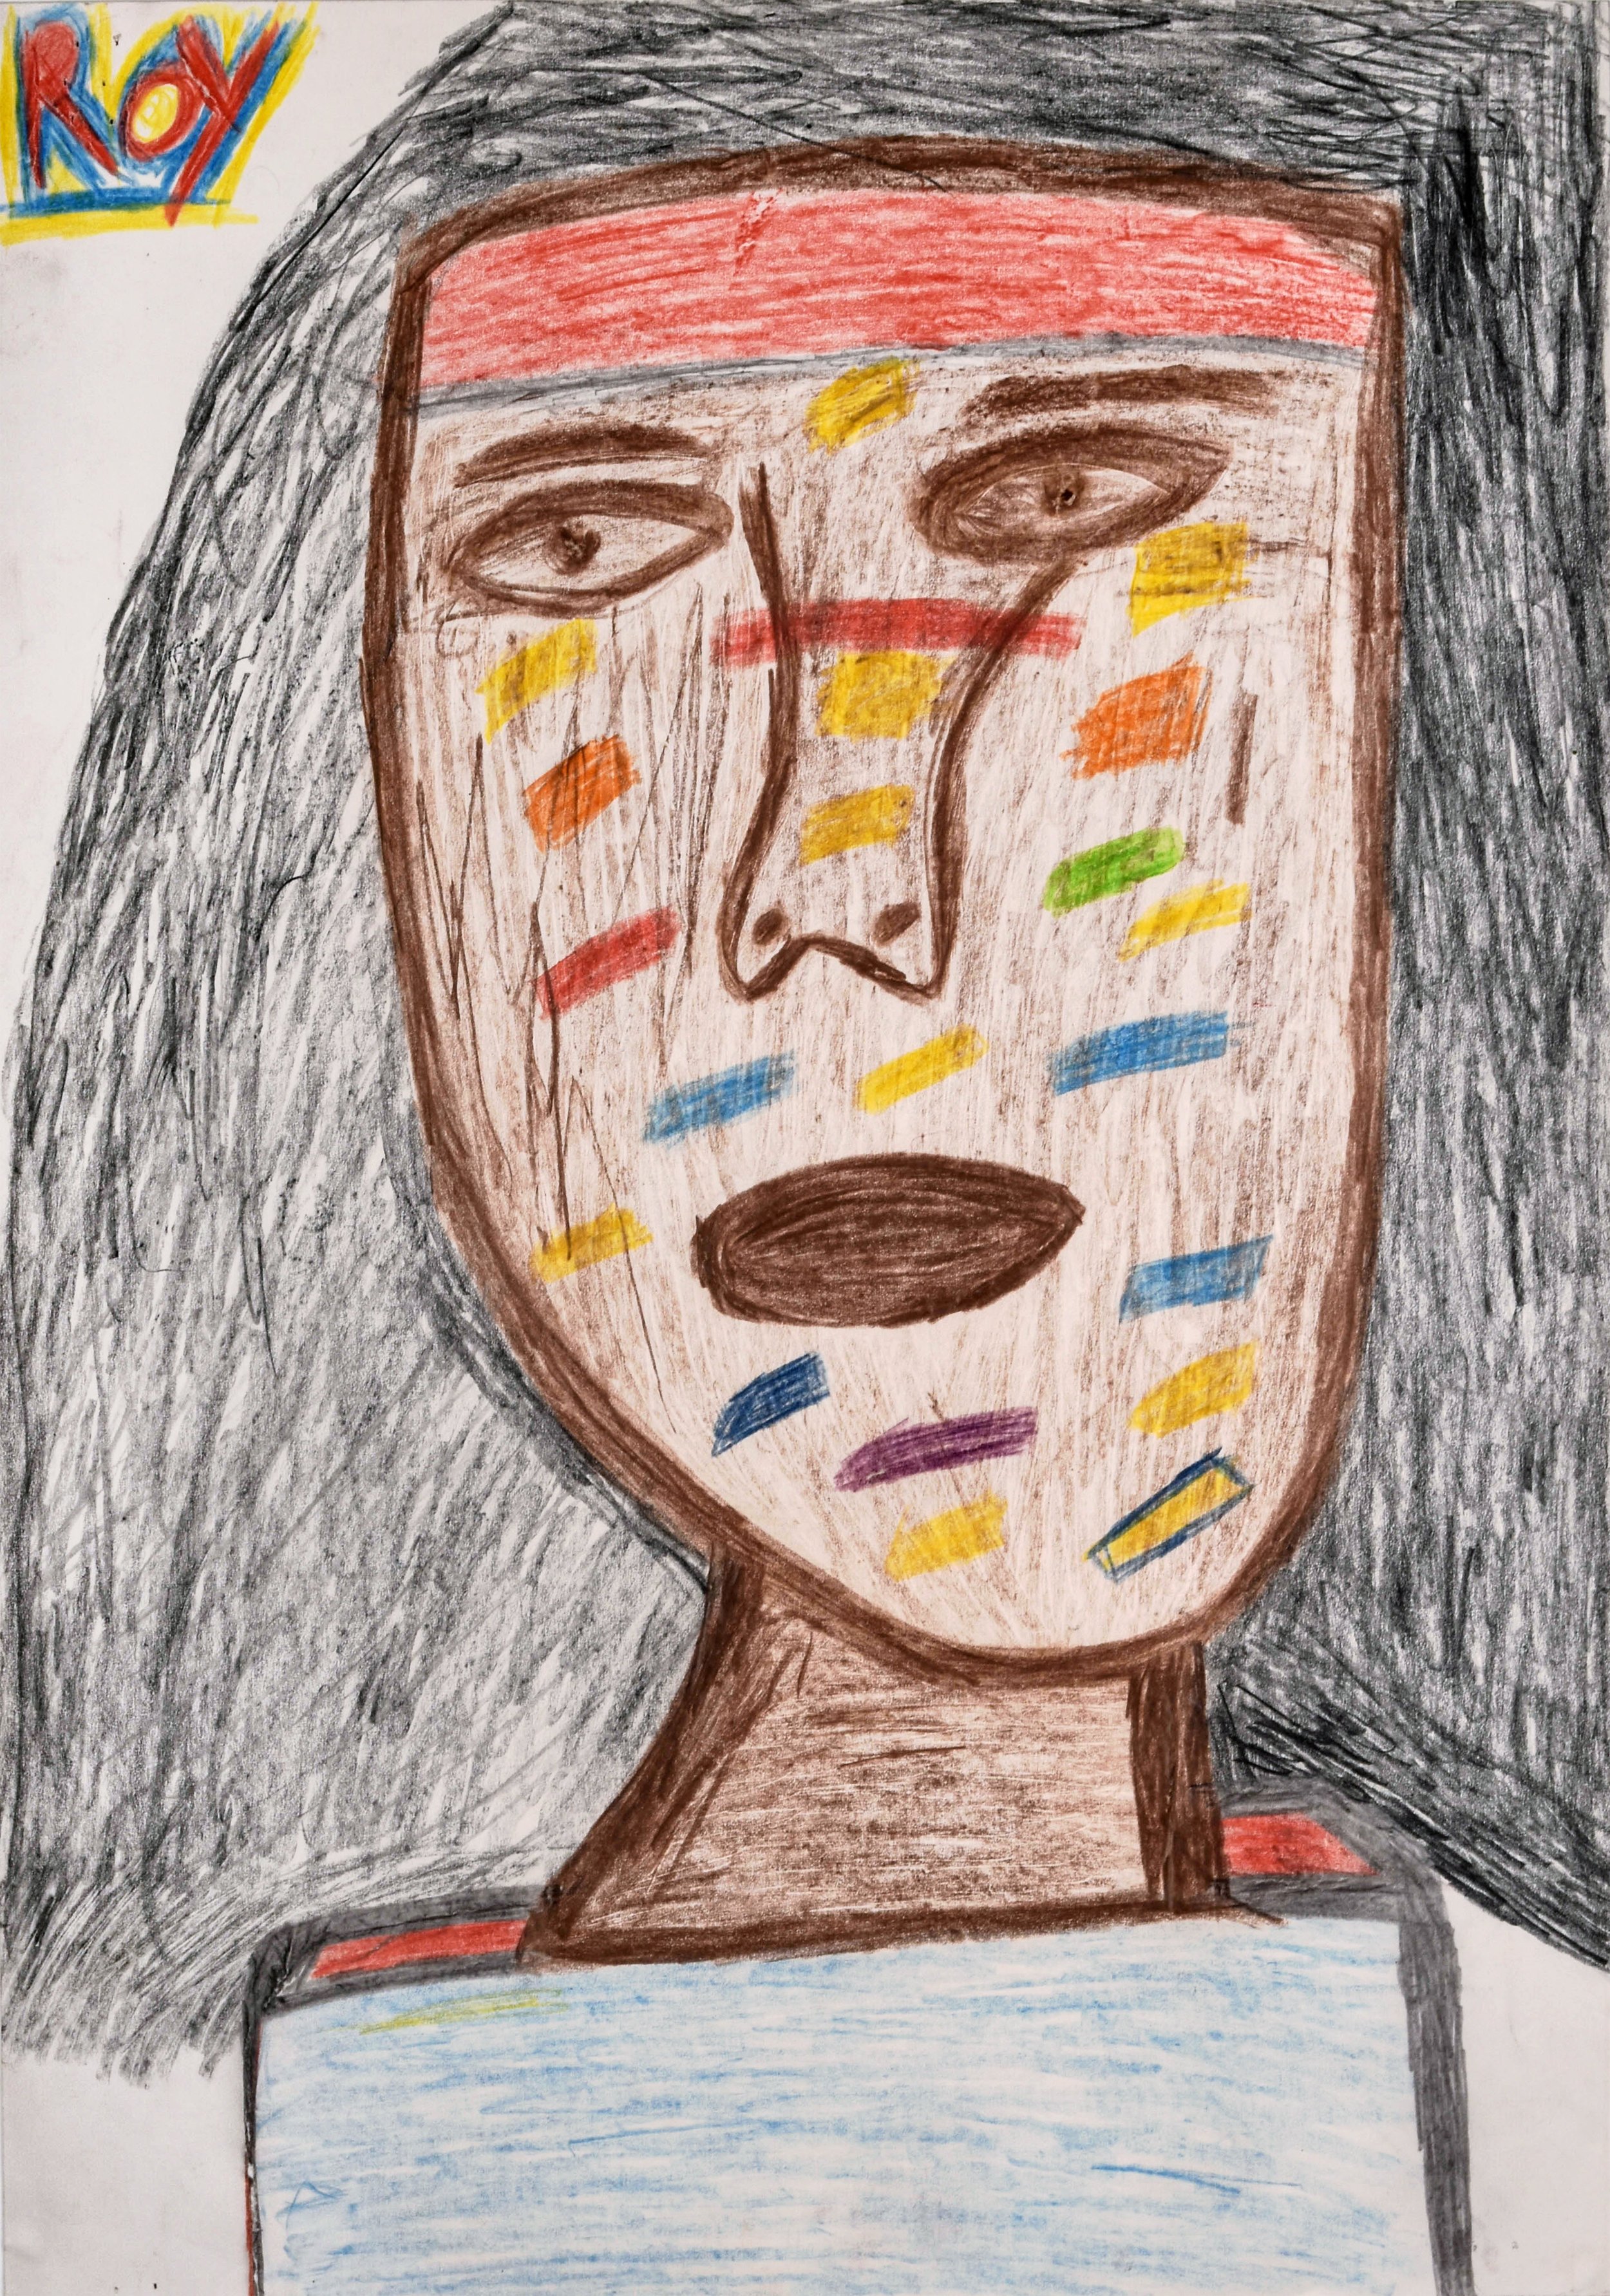  Roy Collinson, Untitled (Indian Face), 1997 Pencil crayon on paper 42x60cm 